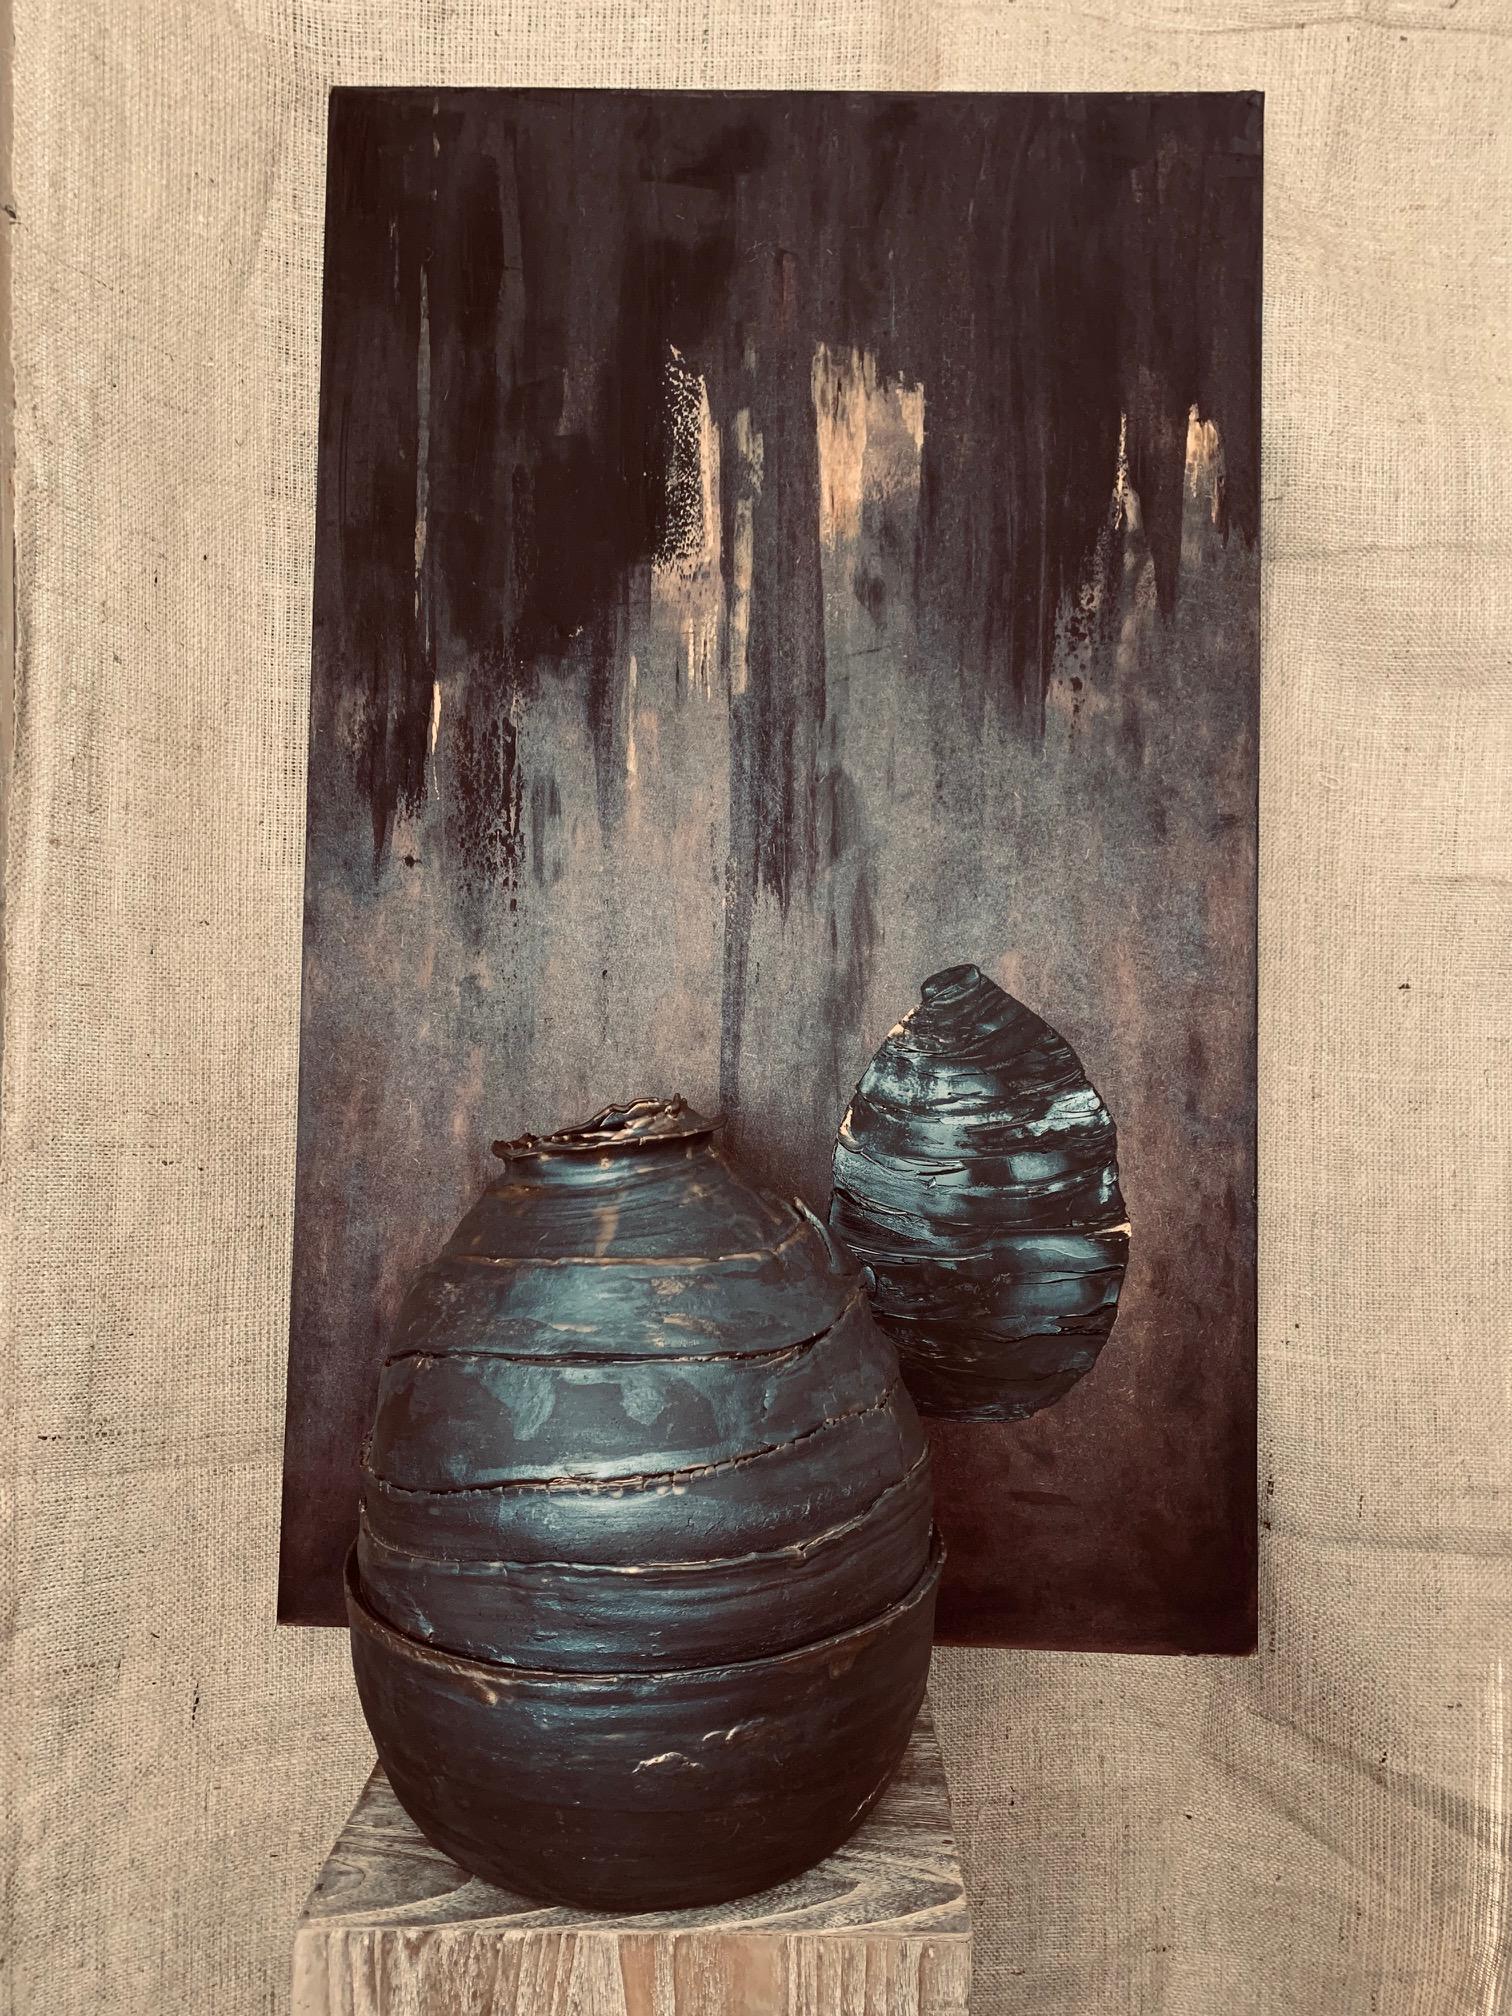 Contemporary Ceramic Vase, 21 Century Designed by Iris Miller (מילר) Assulin 
Hand made, black clay Vase burned in electirc Kiln at 1200 degrees, painted with bronze glazing
Approx 40n cm height 
Approx 30 cm width 

Contemporary Painting, 21